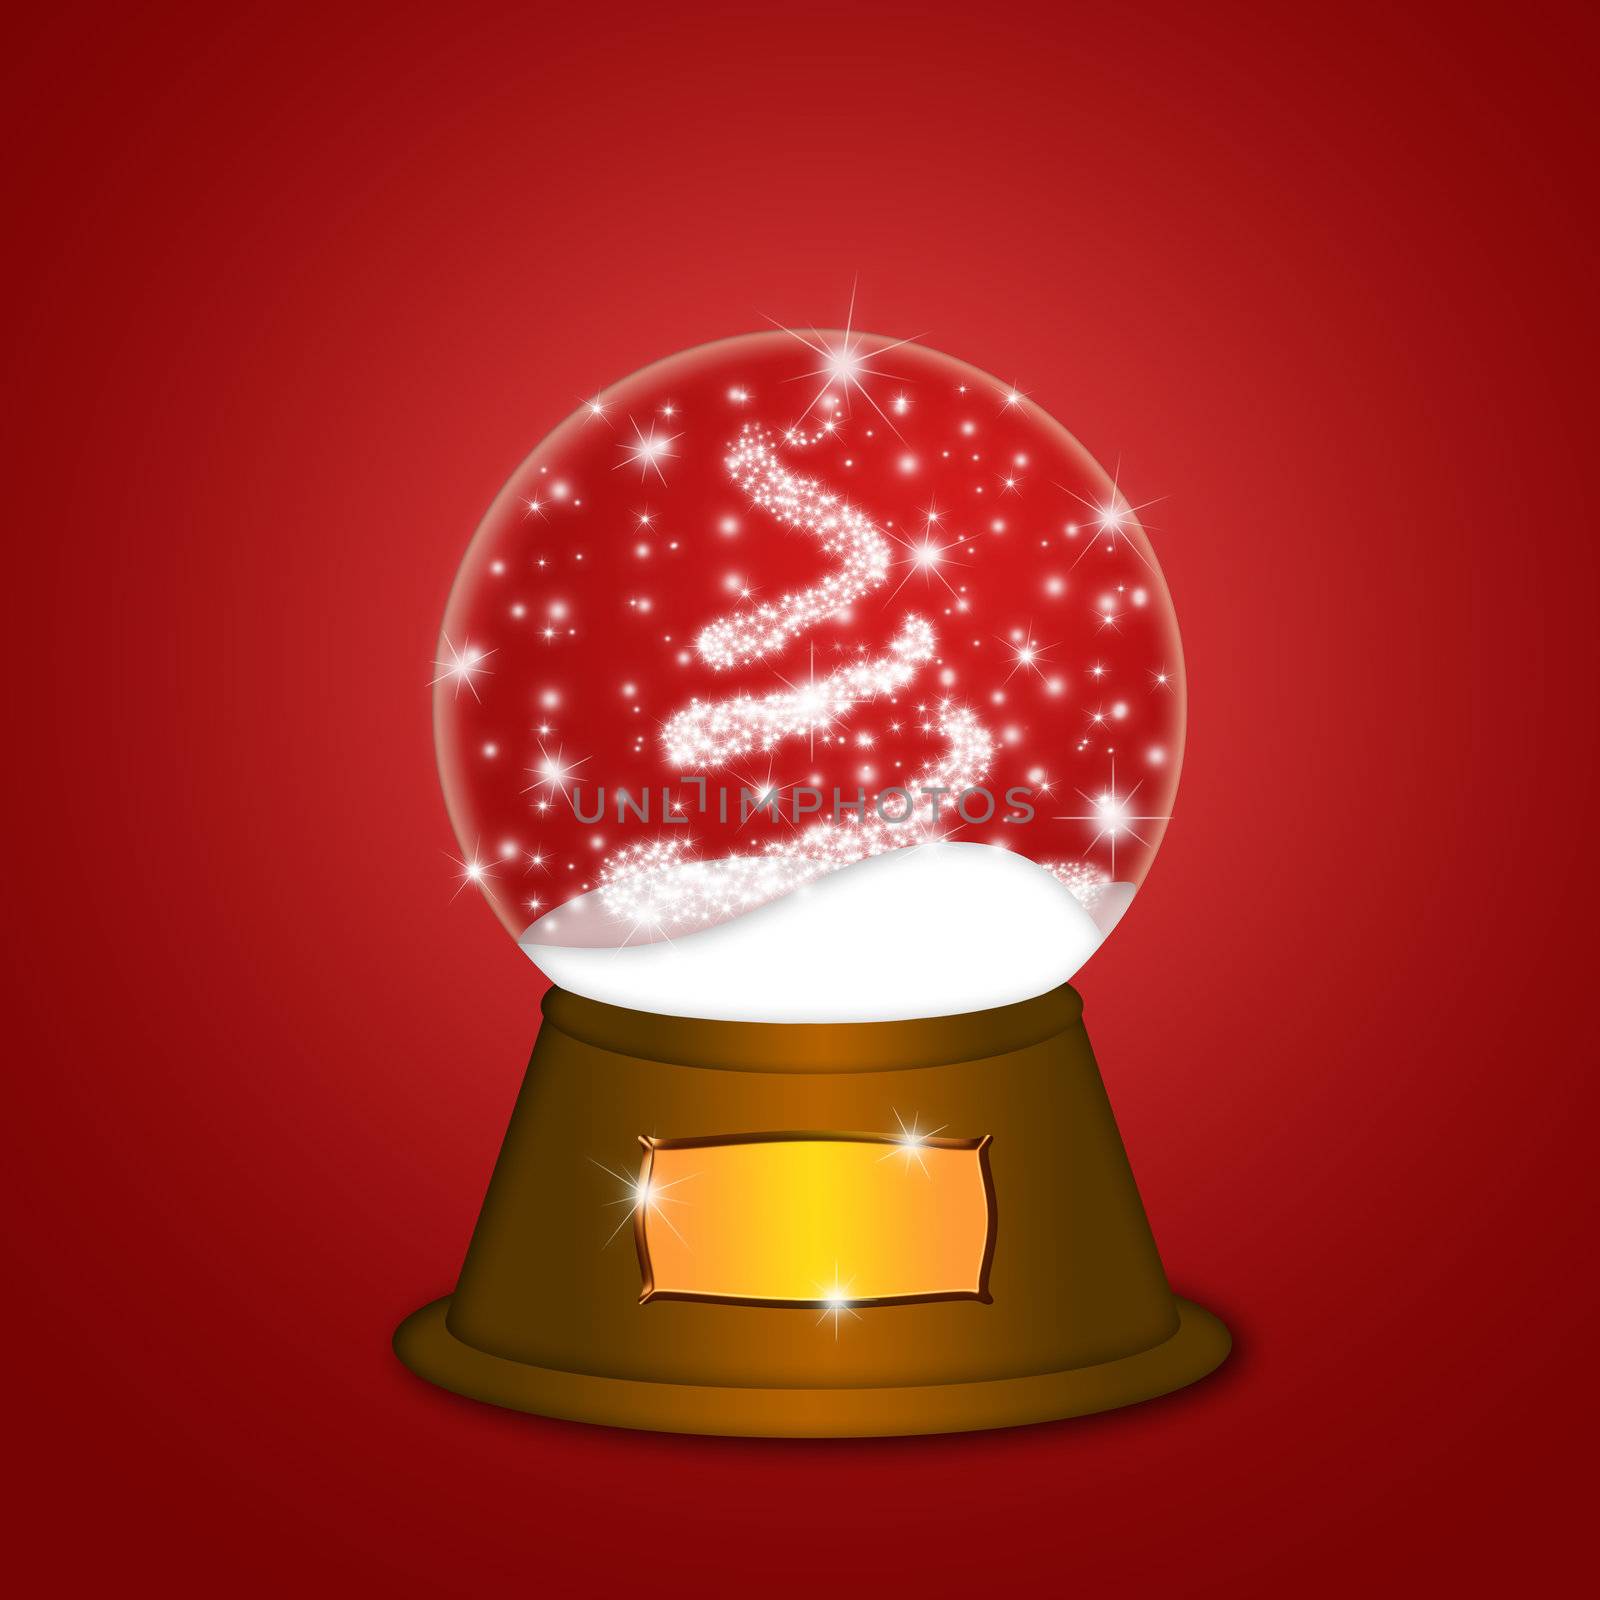 Water Snow Globe with Christmas Tree Sparkles Red by jpldesigns